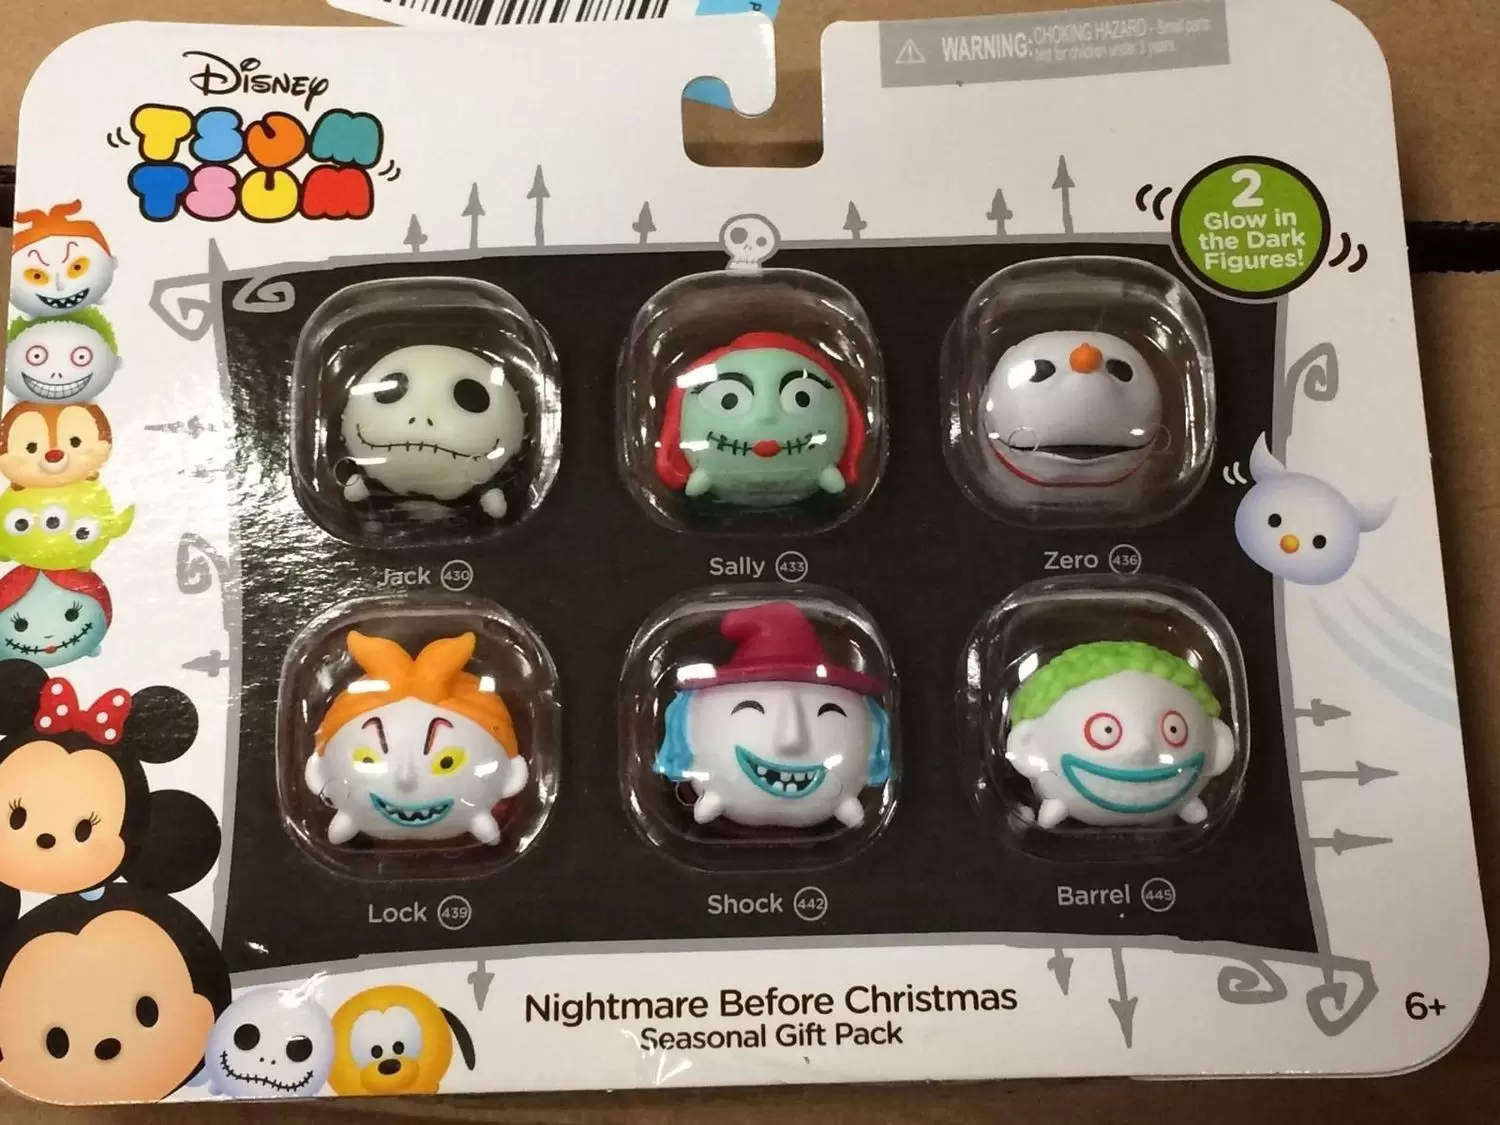 Tsum Tsum Jakks Pacific Exclusive And Sets - Walgreens Exclusive Nightmare Before Christmas Set 6 Pack